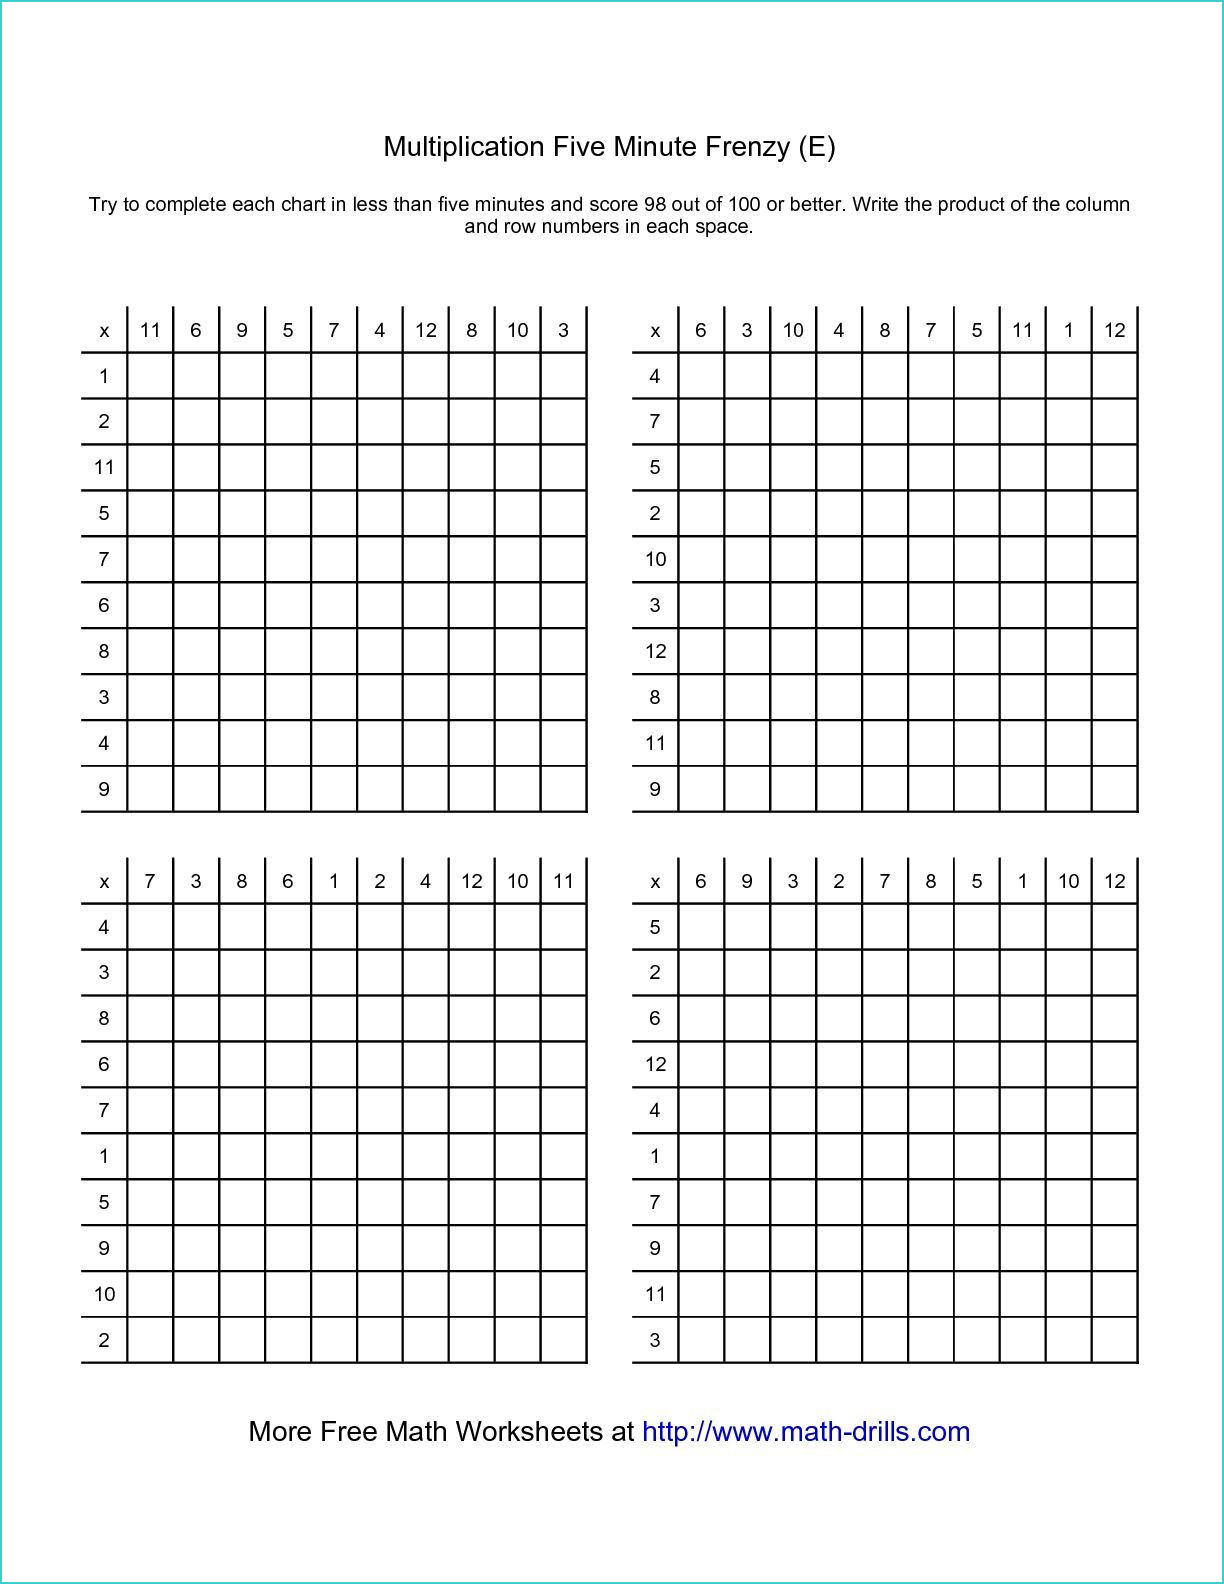 Free Math Worksheets Third Grade 3 Fractions and Decimals Adding Mixed Numbers Like Denominators